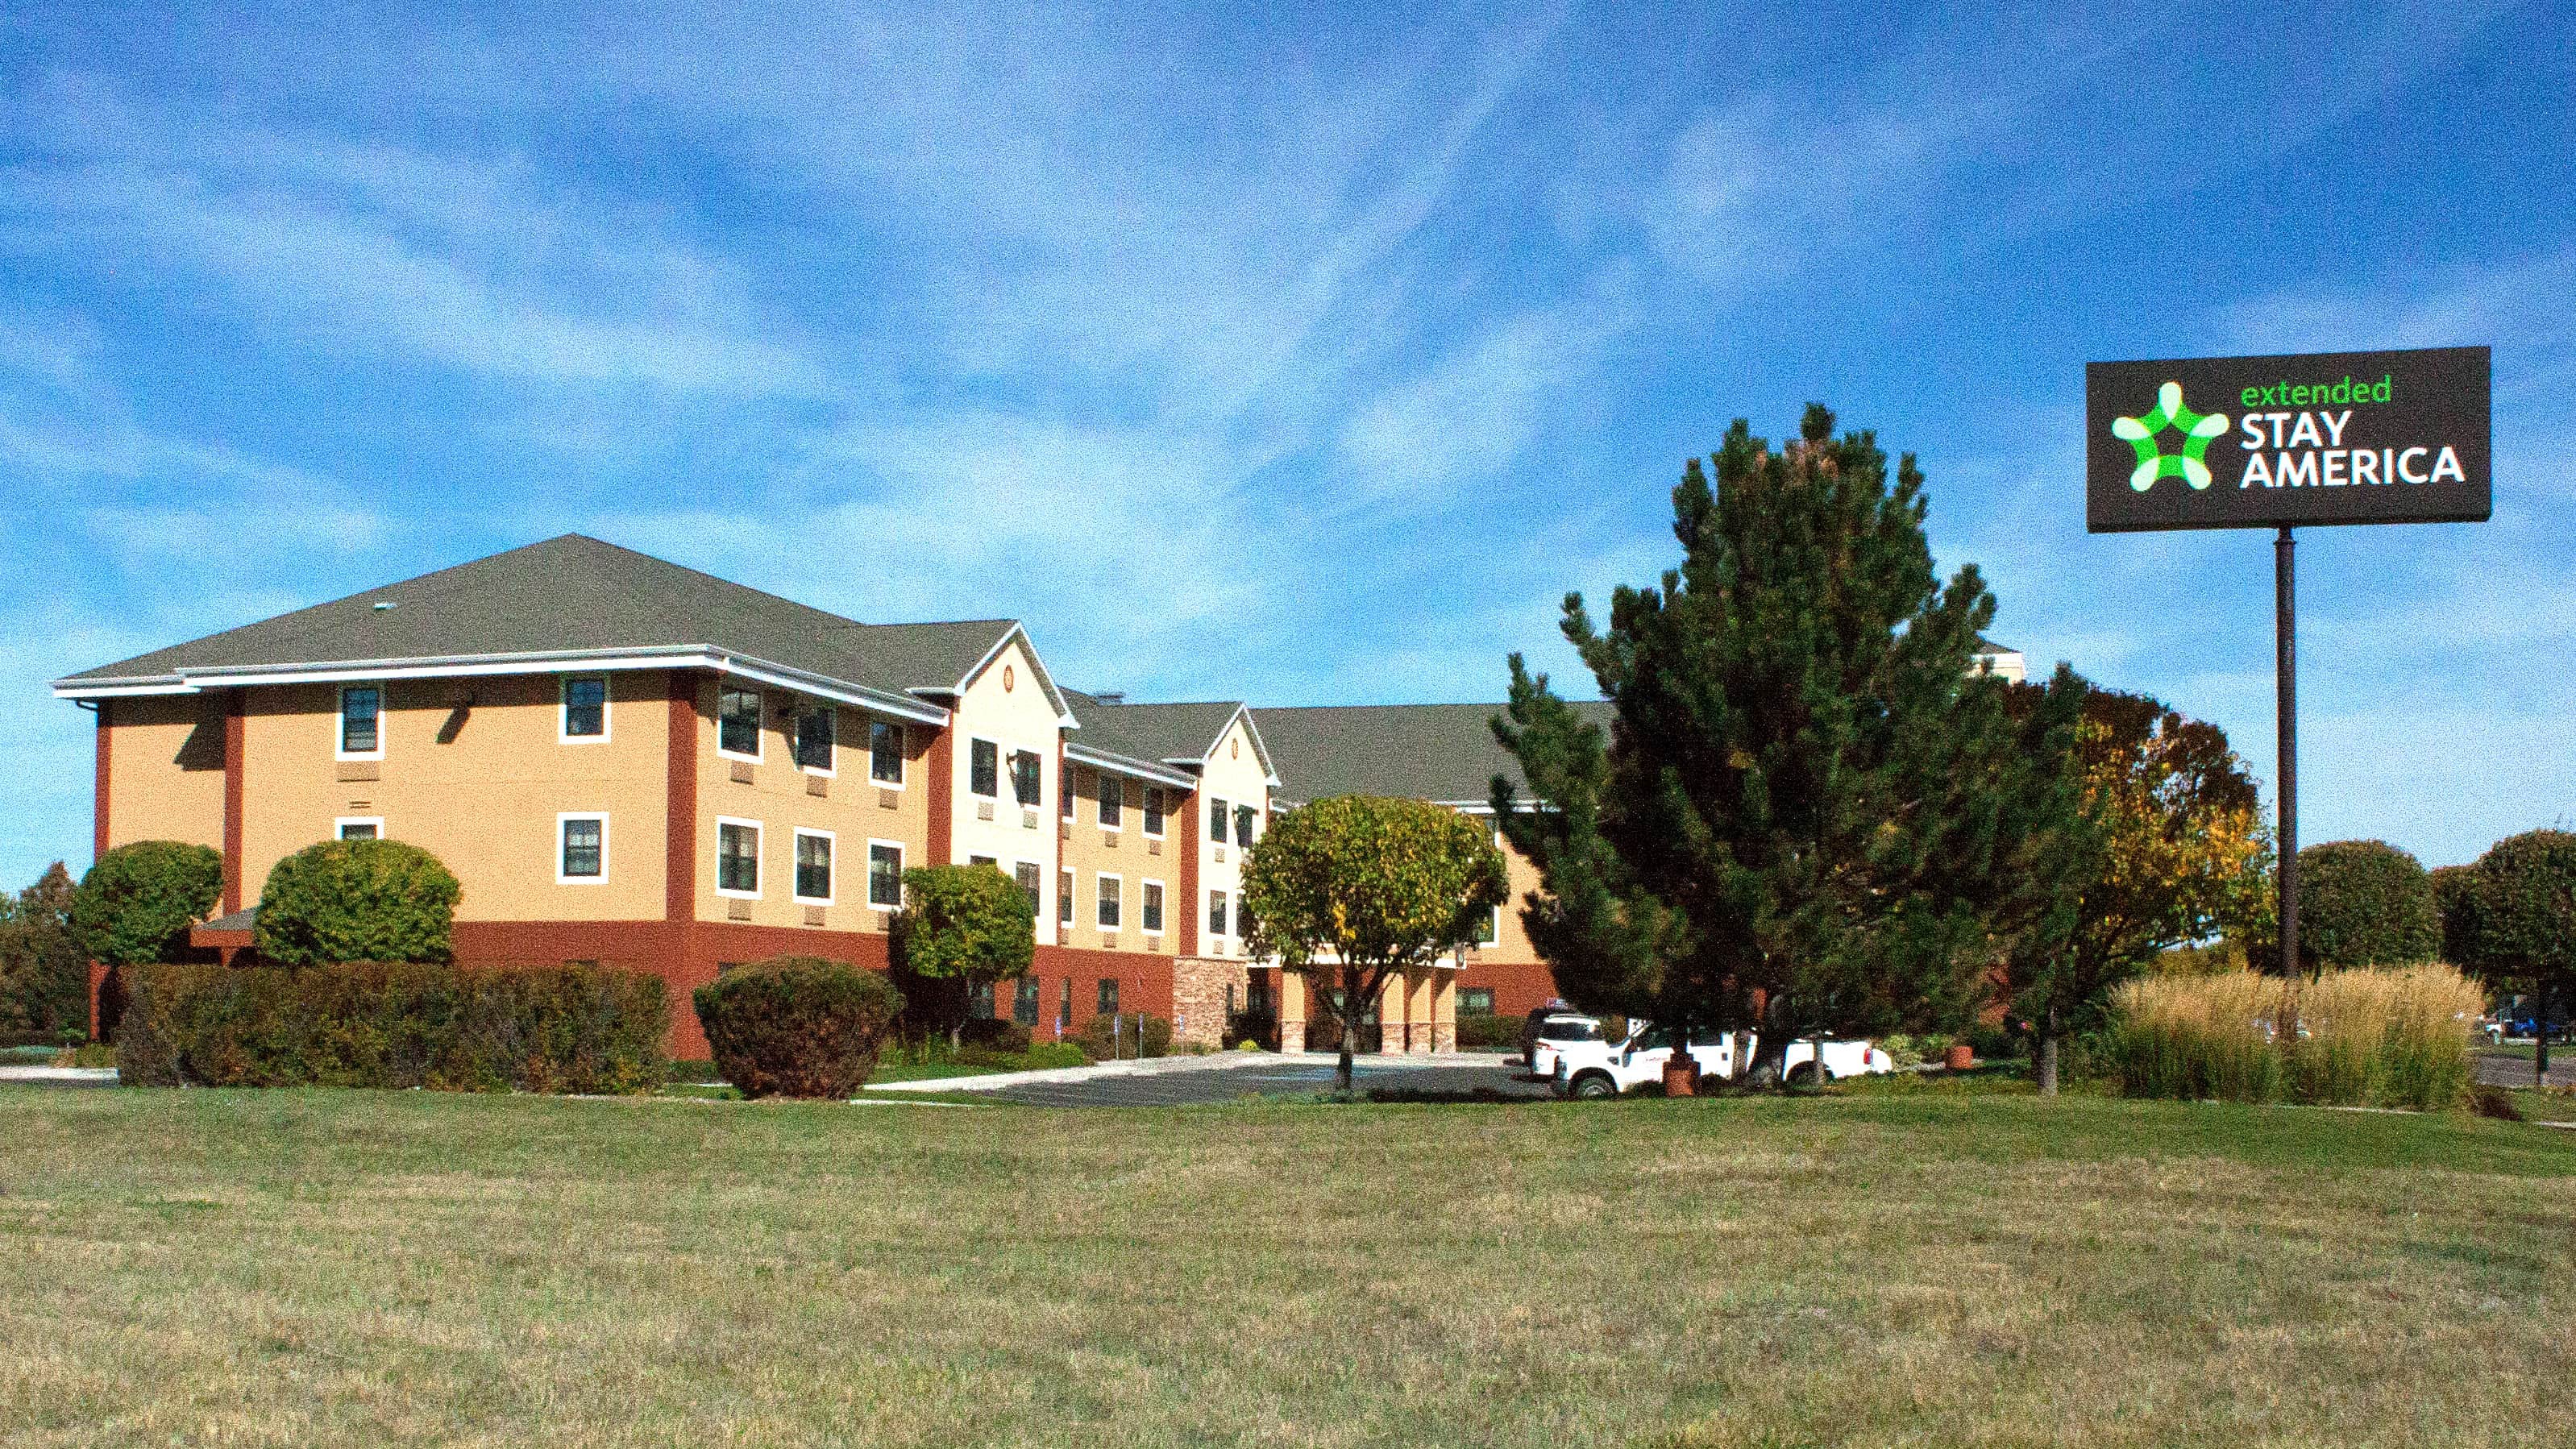 Photo of Extended Stay America - Great Falls - Missouri River, Great Falls, MT